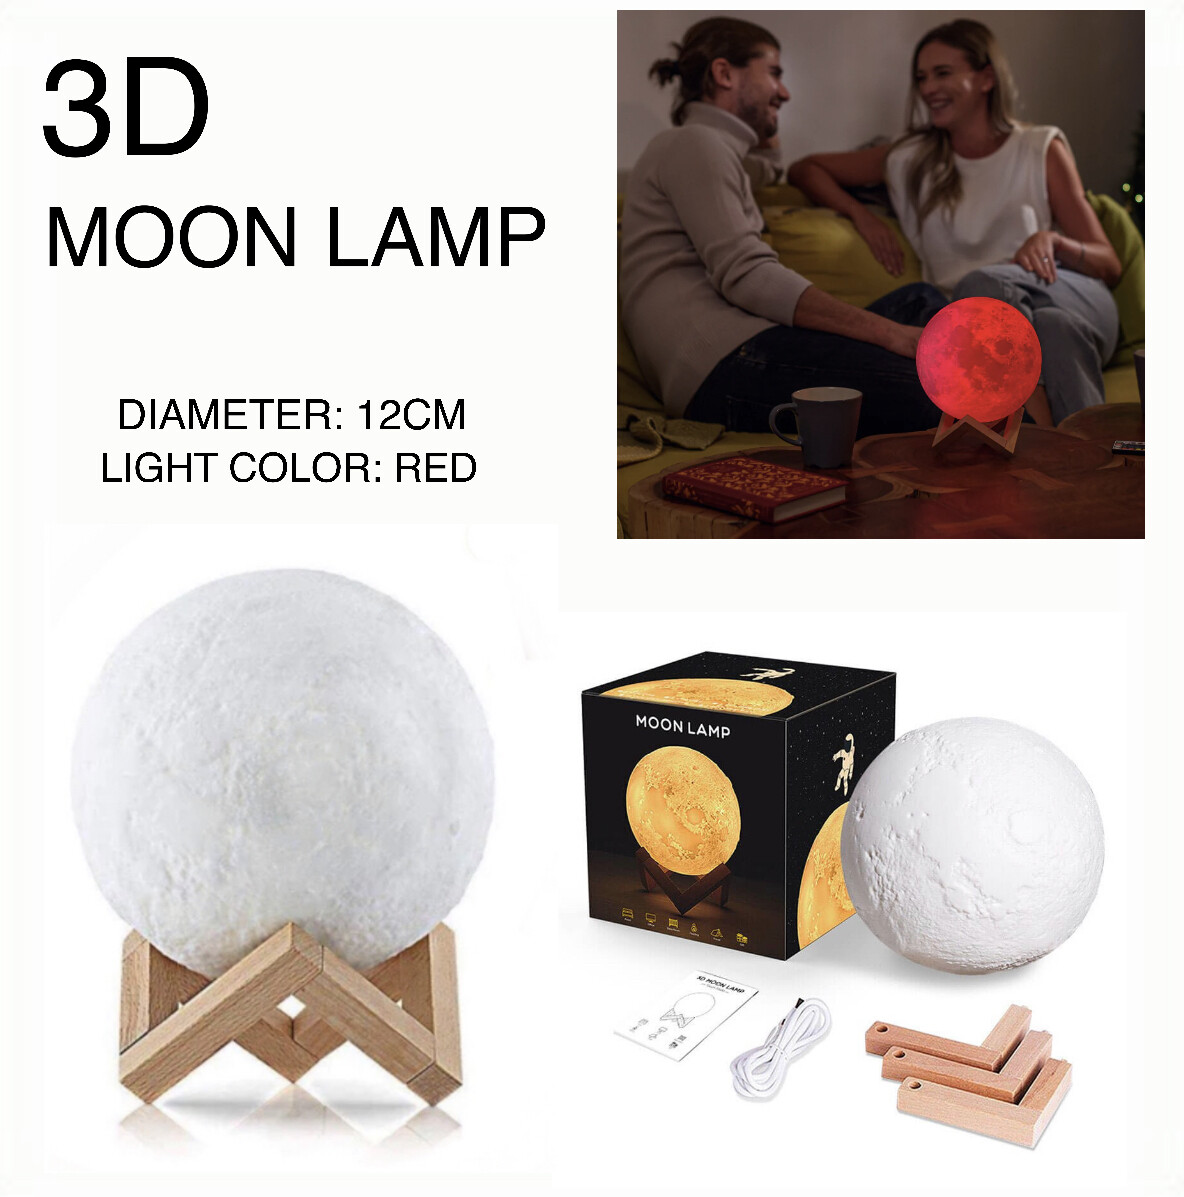 3D Moon Lamp (RED)